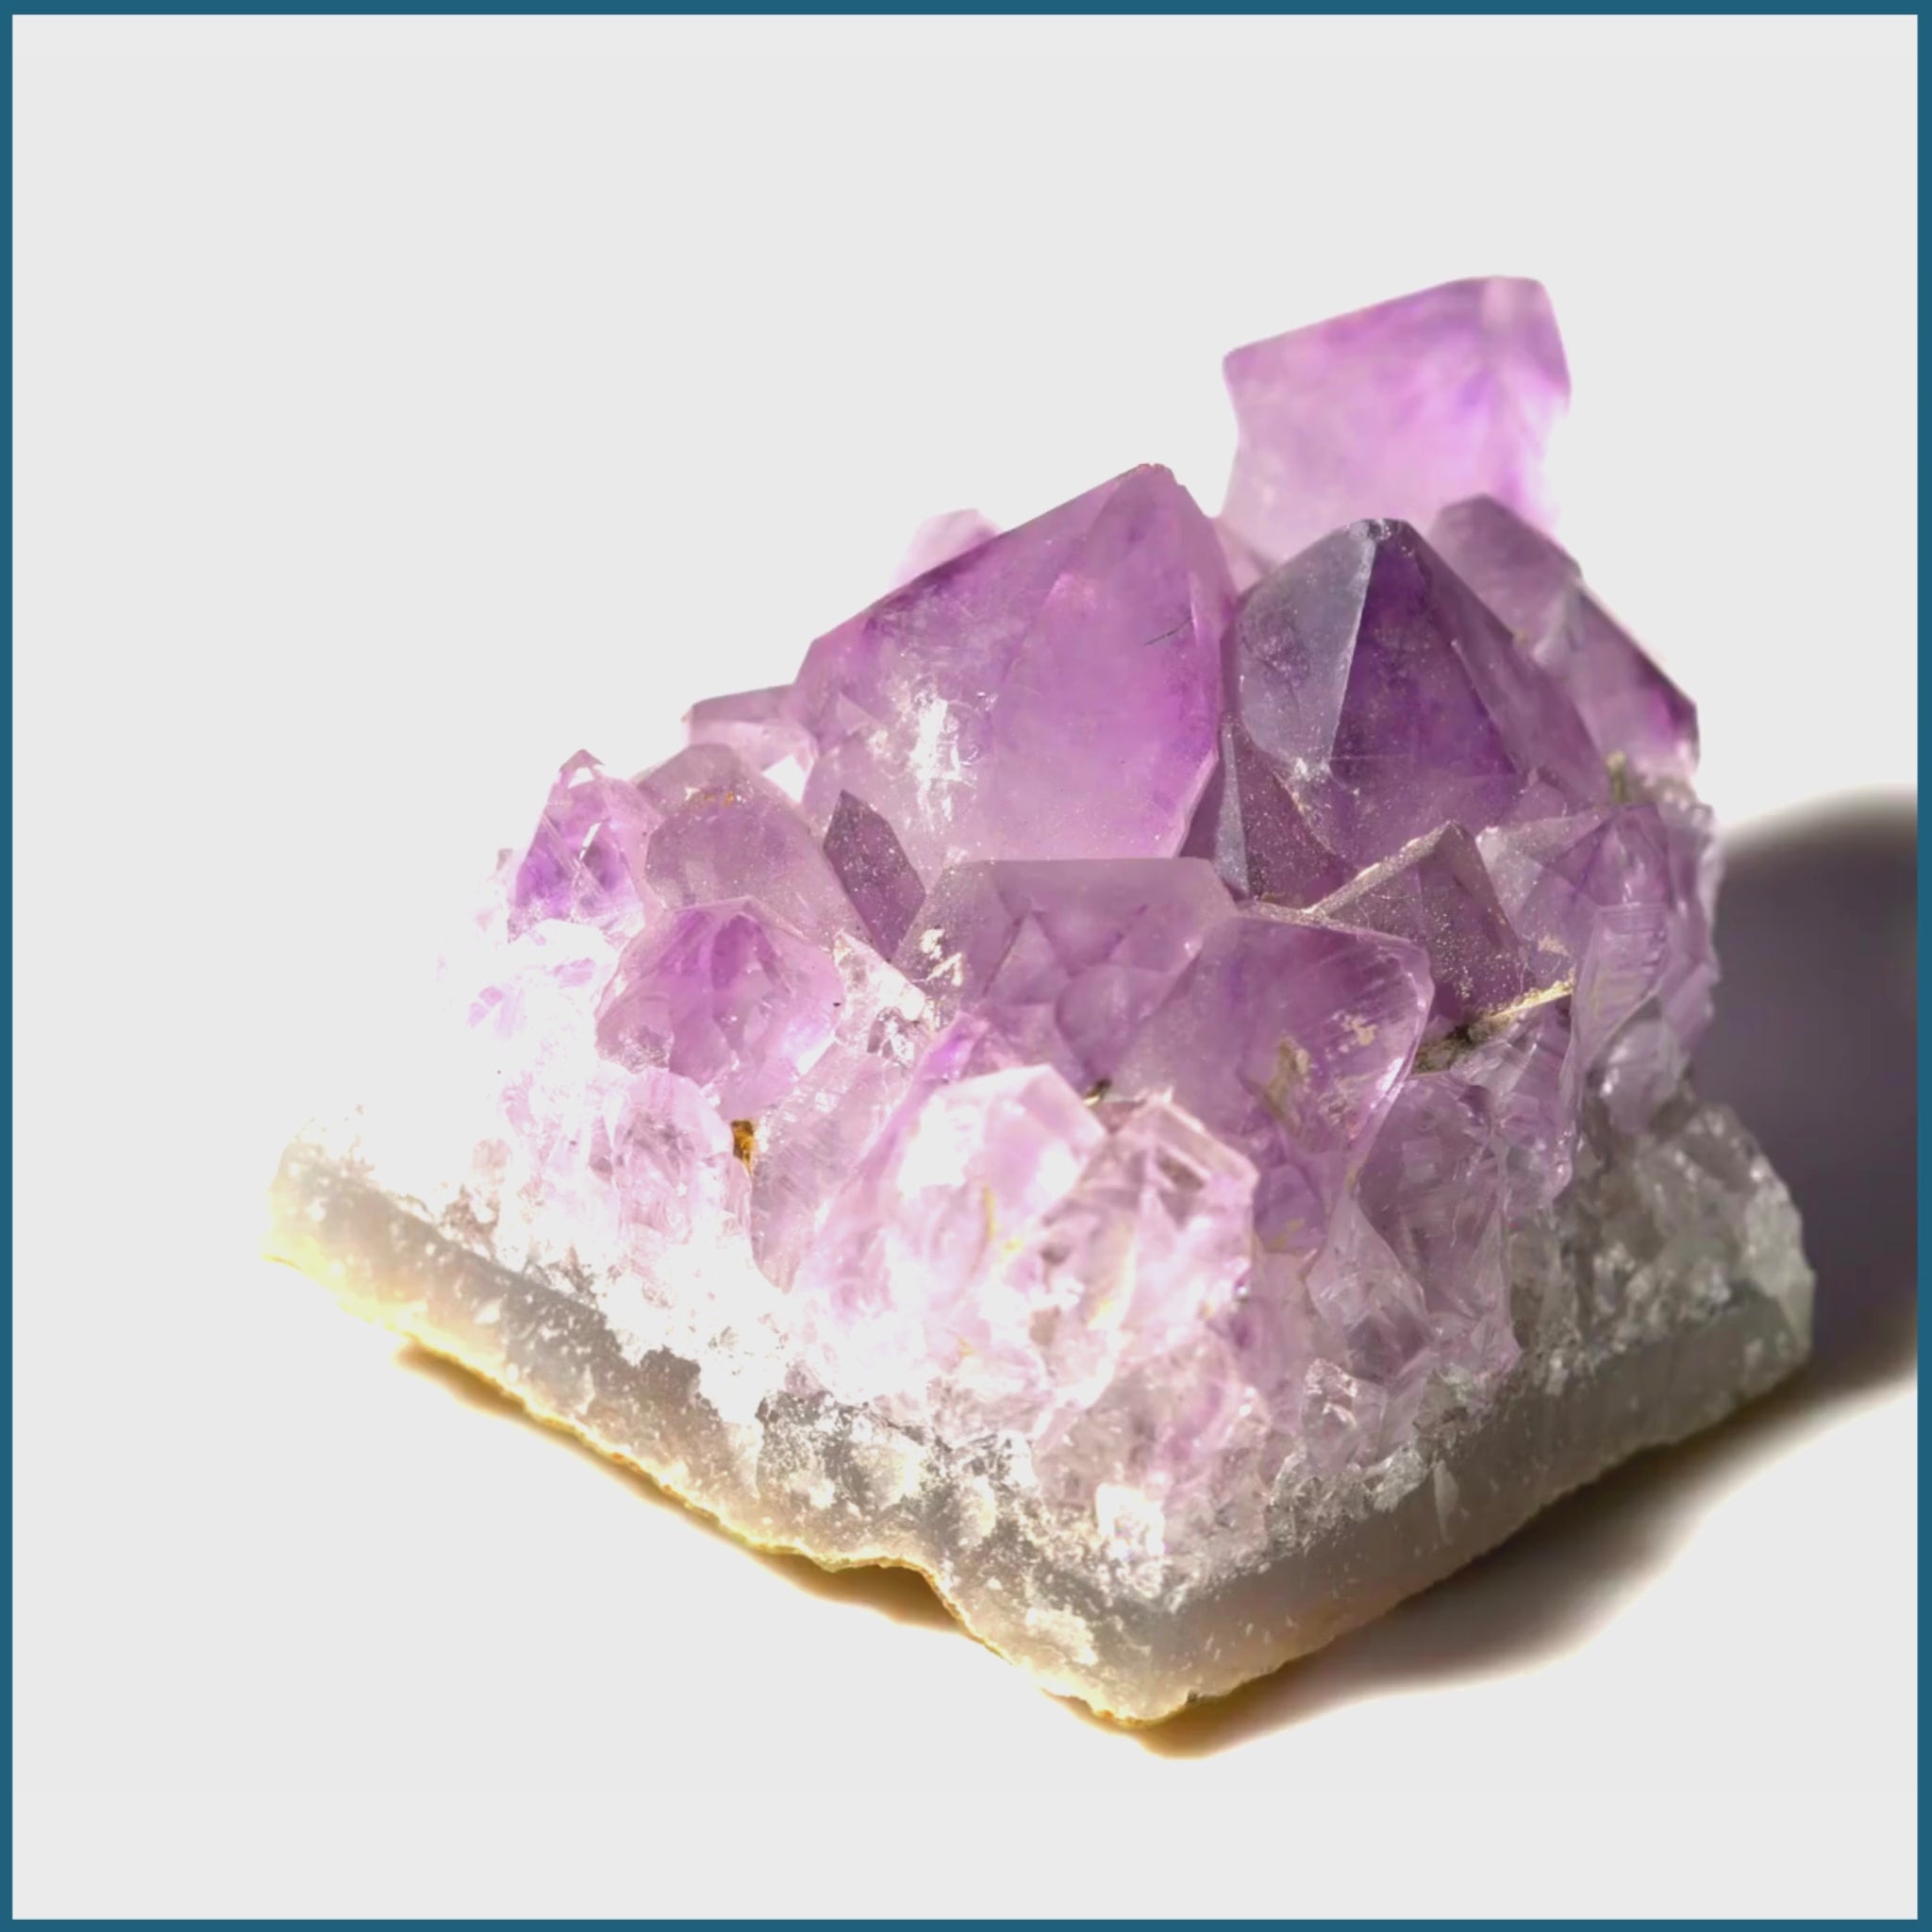 Enhance Your Space with Stunning Amethyst Clusters - Natural Healing Crystals for Positive Energy and Décor - 0